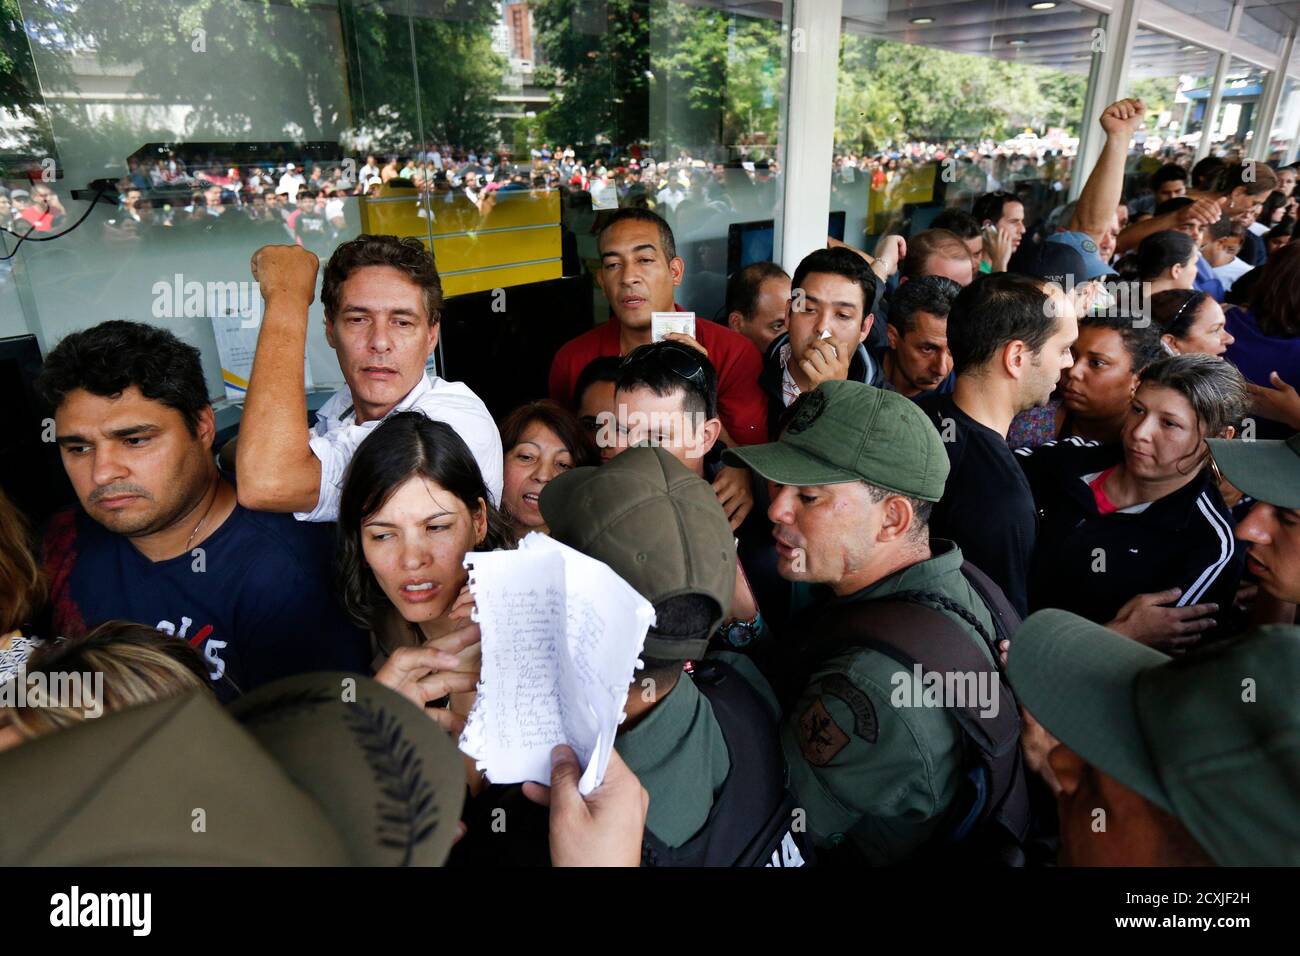 Shoppers outside a Daka store as they wait to shop for electronic goods in Caracas November 9, 2013. Venezuelan President Nicolas Maduro ordered the military "occupation" of a chain electronic